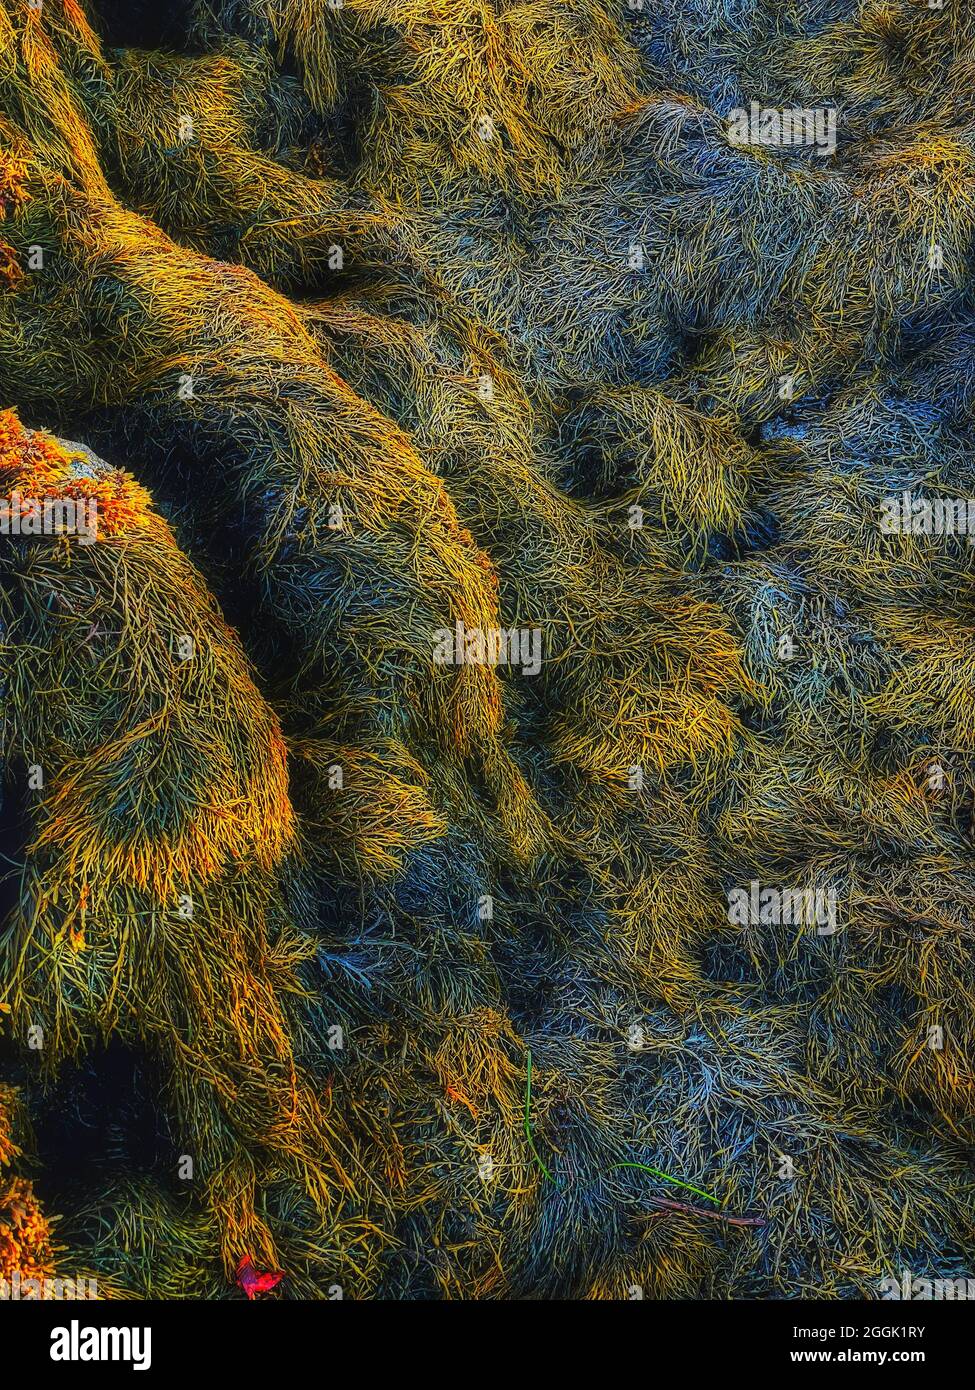 Seaweed, kelp during low tide making beautiful patterns in this vertical color photograph Stock Photo